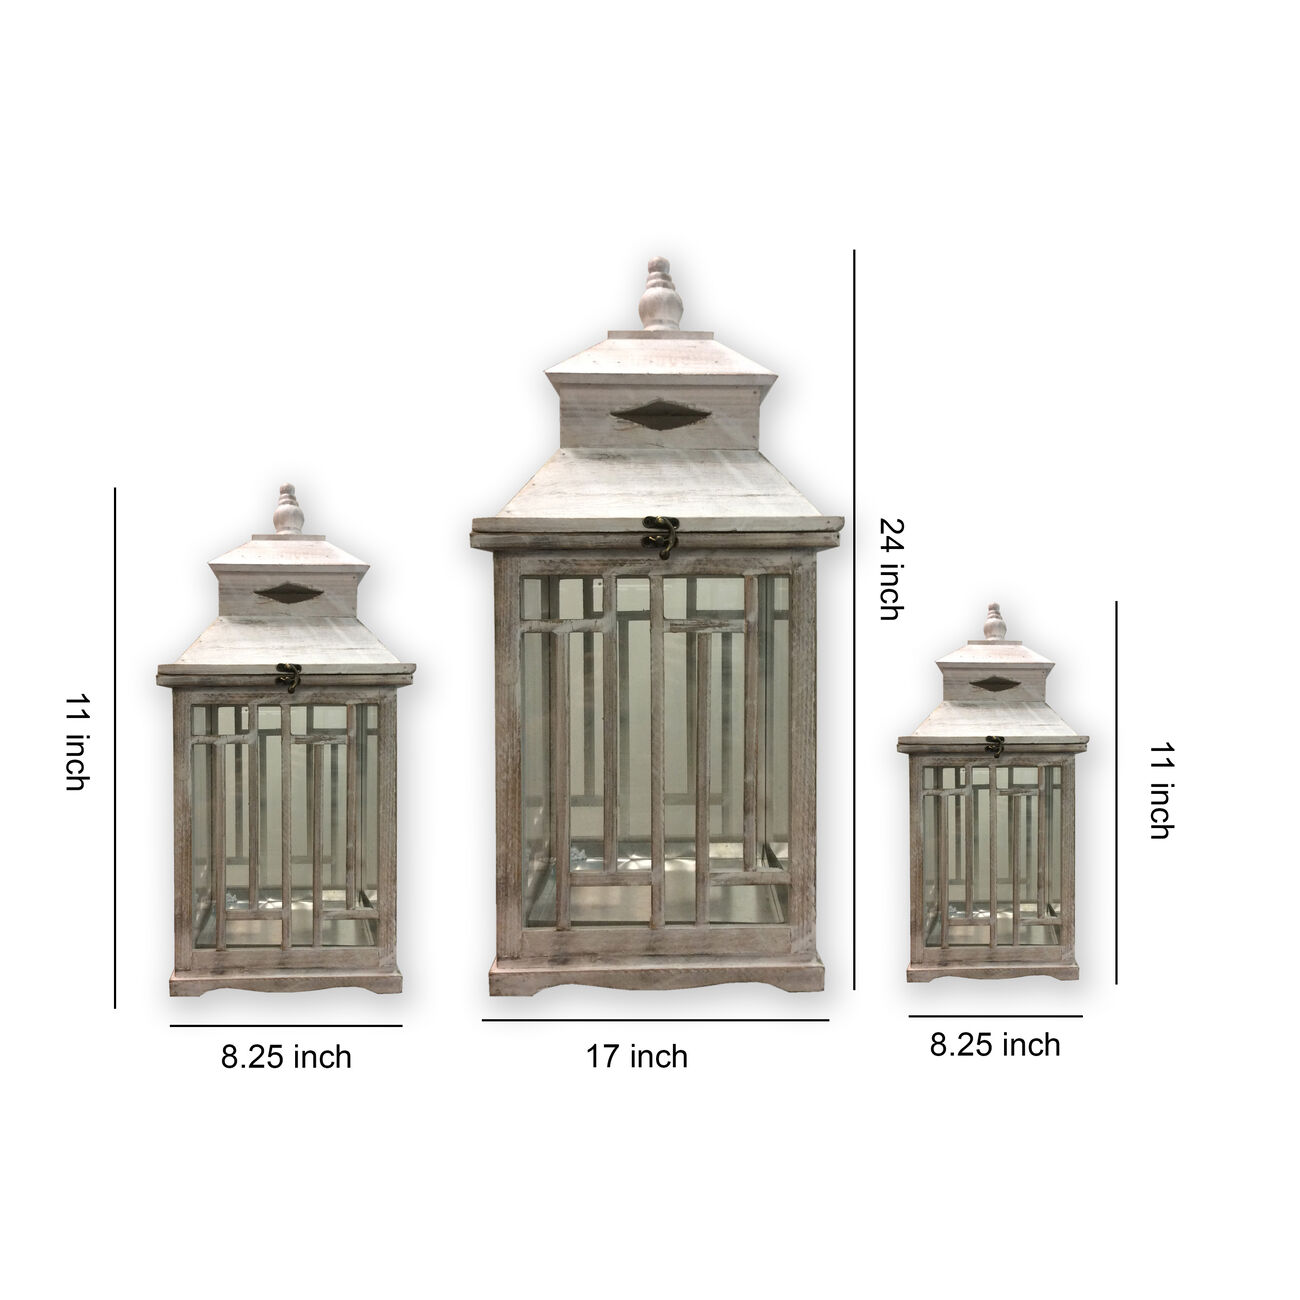 Wooden Lanterns with Peak Shaped Top and Glass Sides, Set of 3, Gray